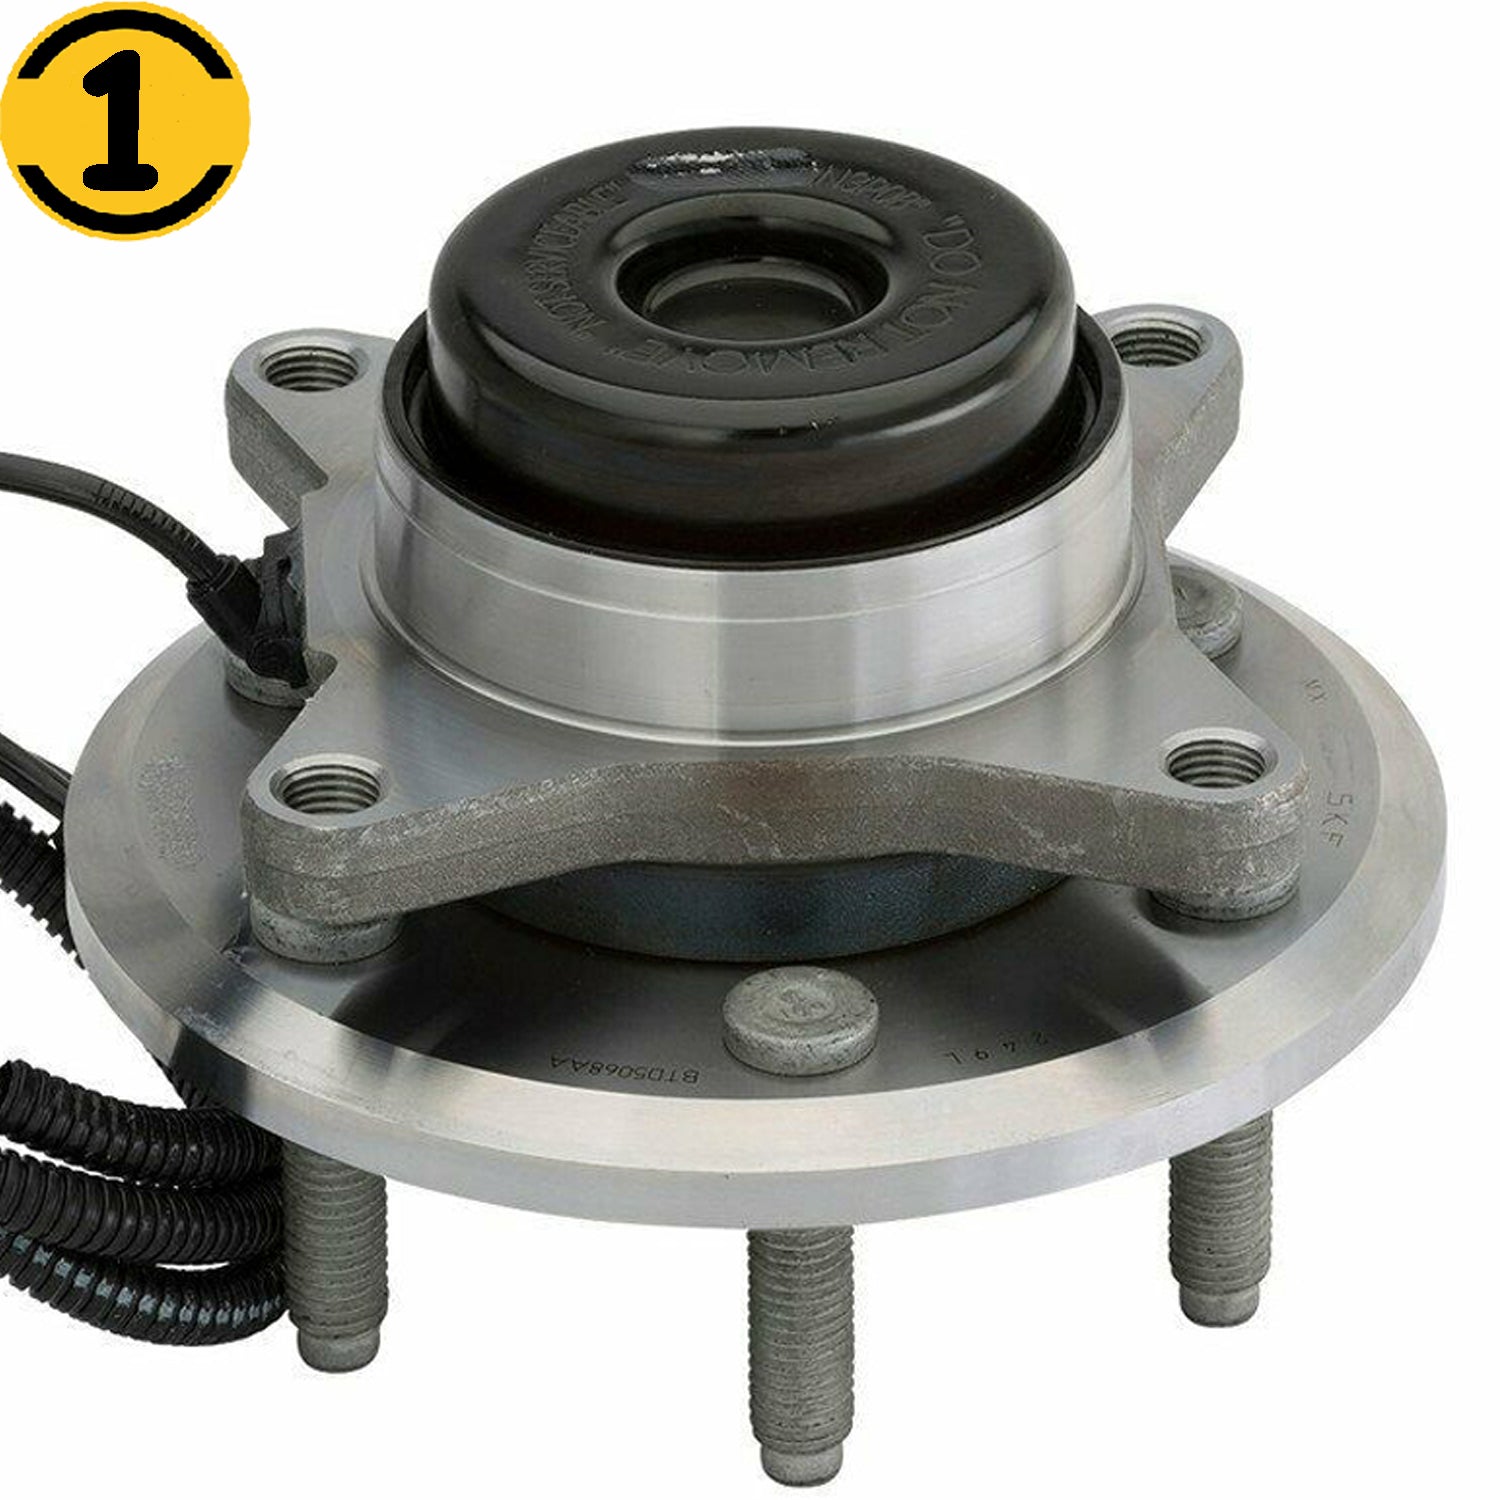 JADODE For 2011-2014 Ford F-150 2WD Model FRONT Wheel Hub Bearing Assembly w/ABS 6 Lugs